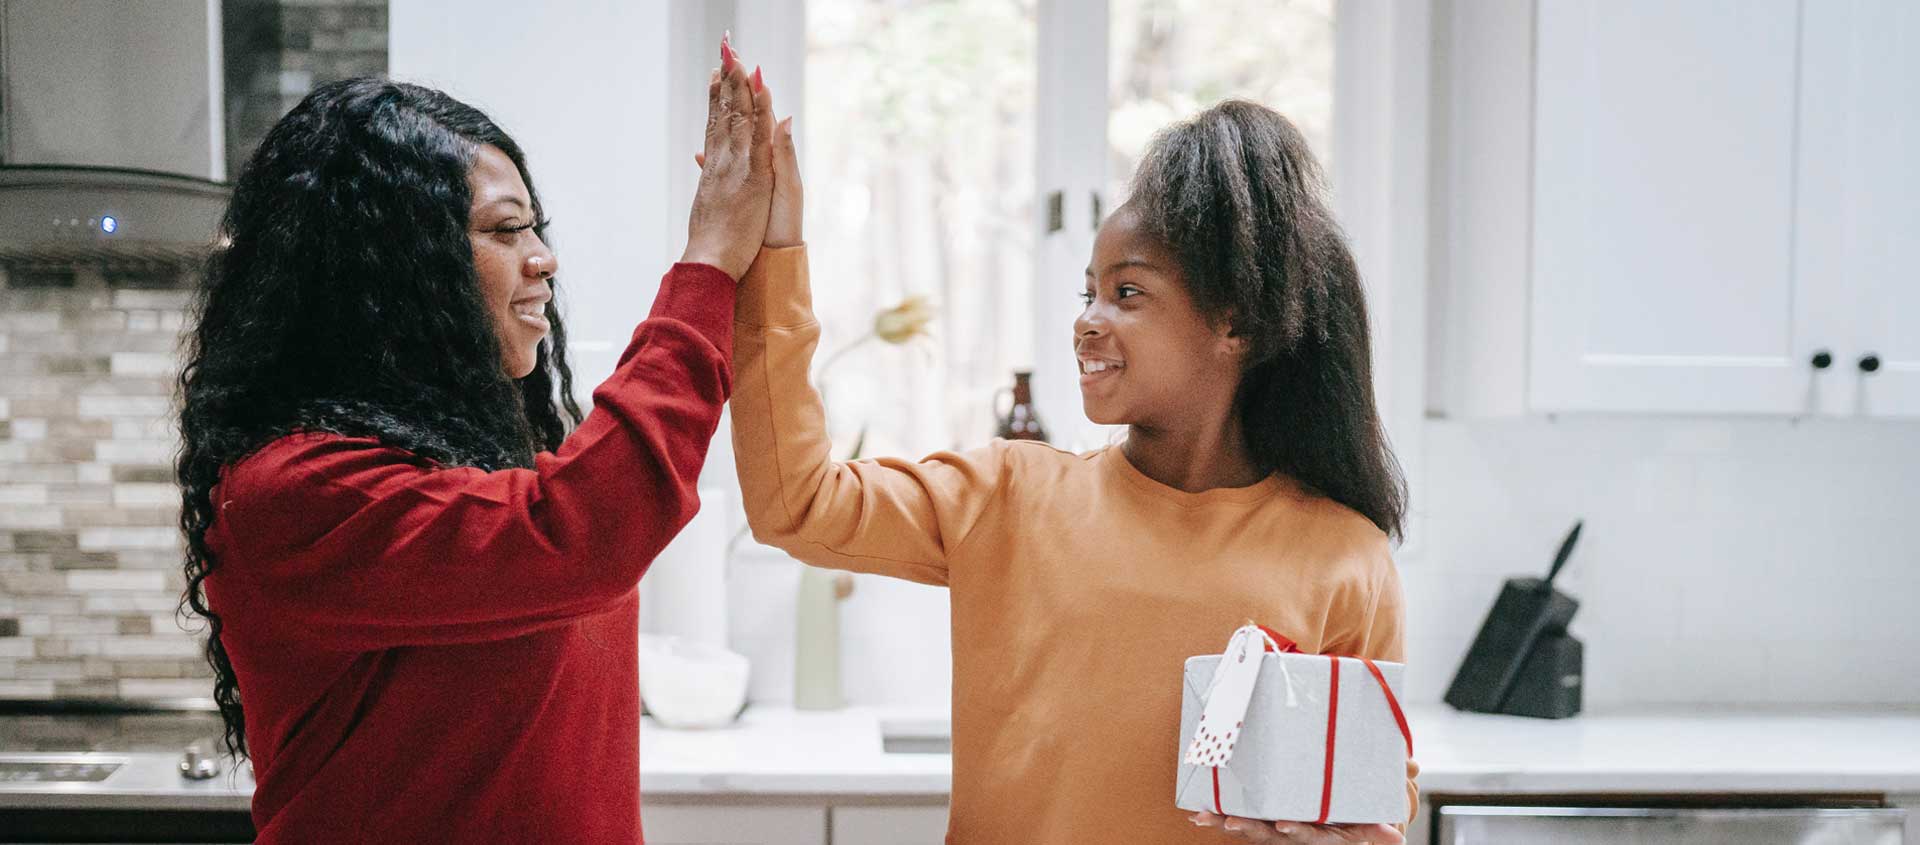 A Black American mother and daughter exchange a high-5 while the daughter holds a holiday present.